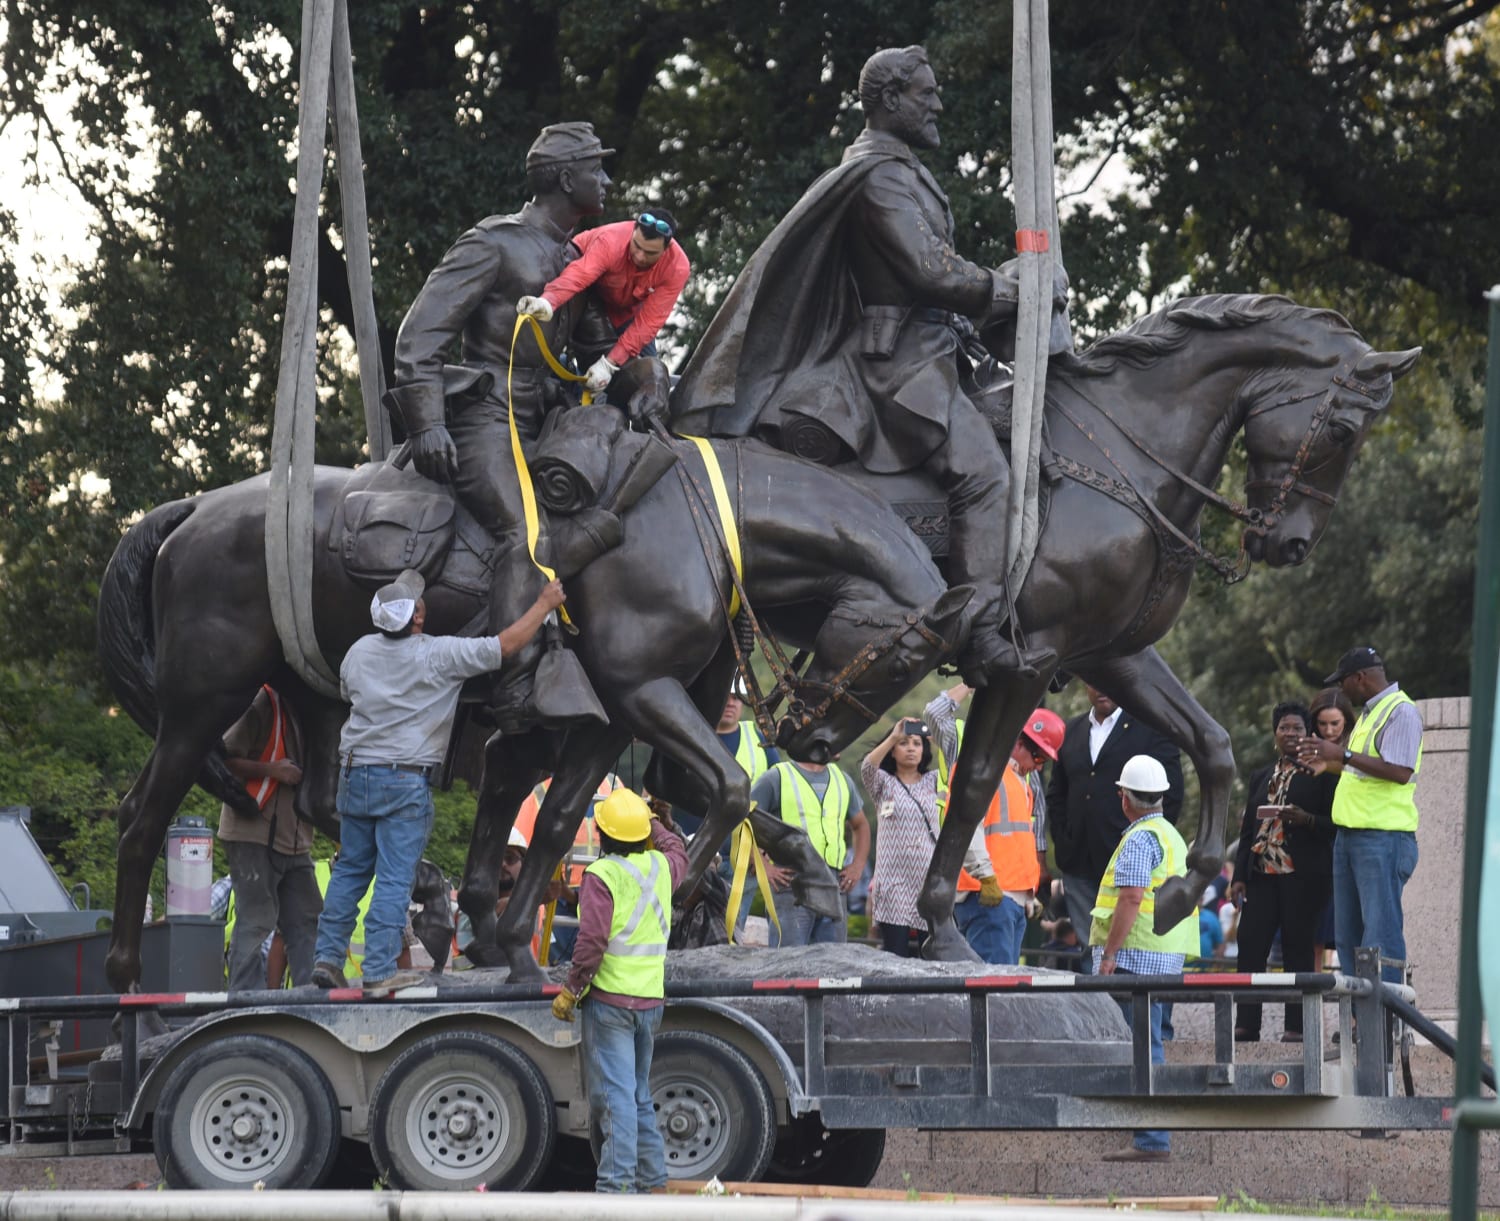 Robert E. Lee Statue in Dallas Removed From Park